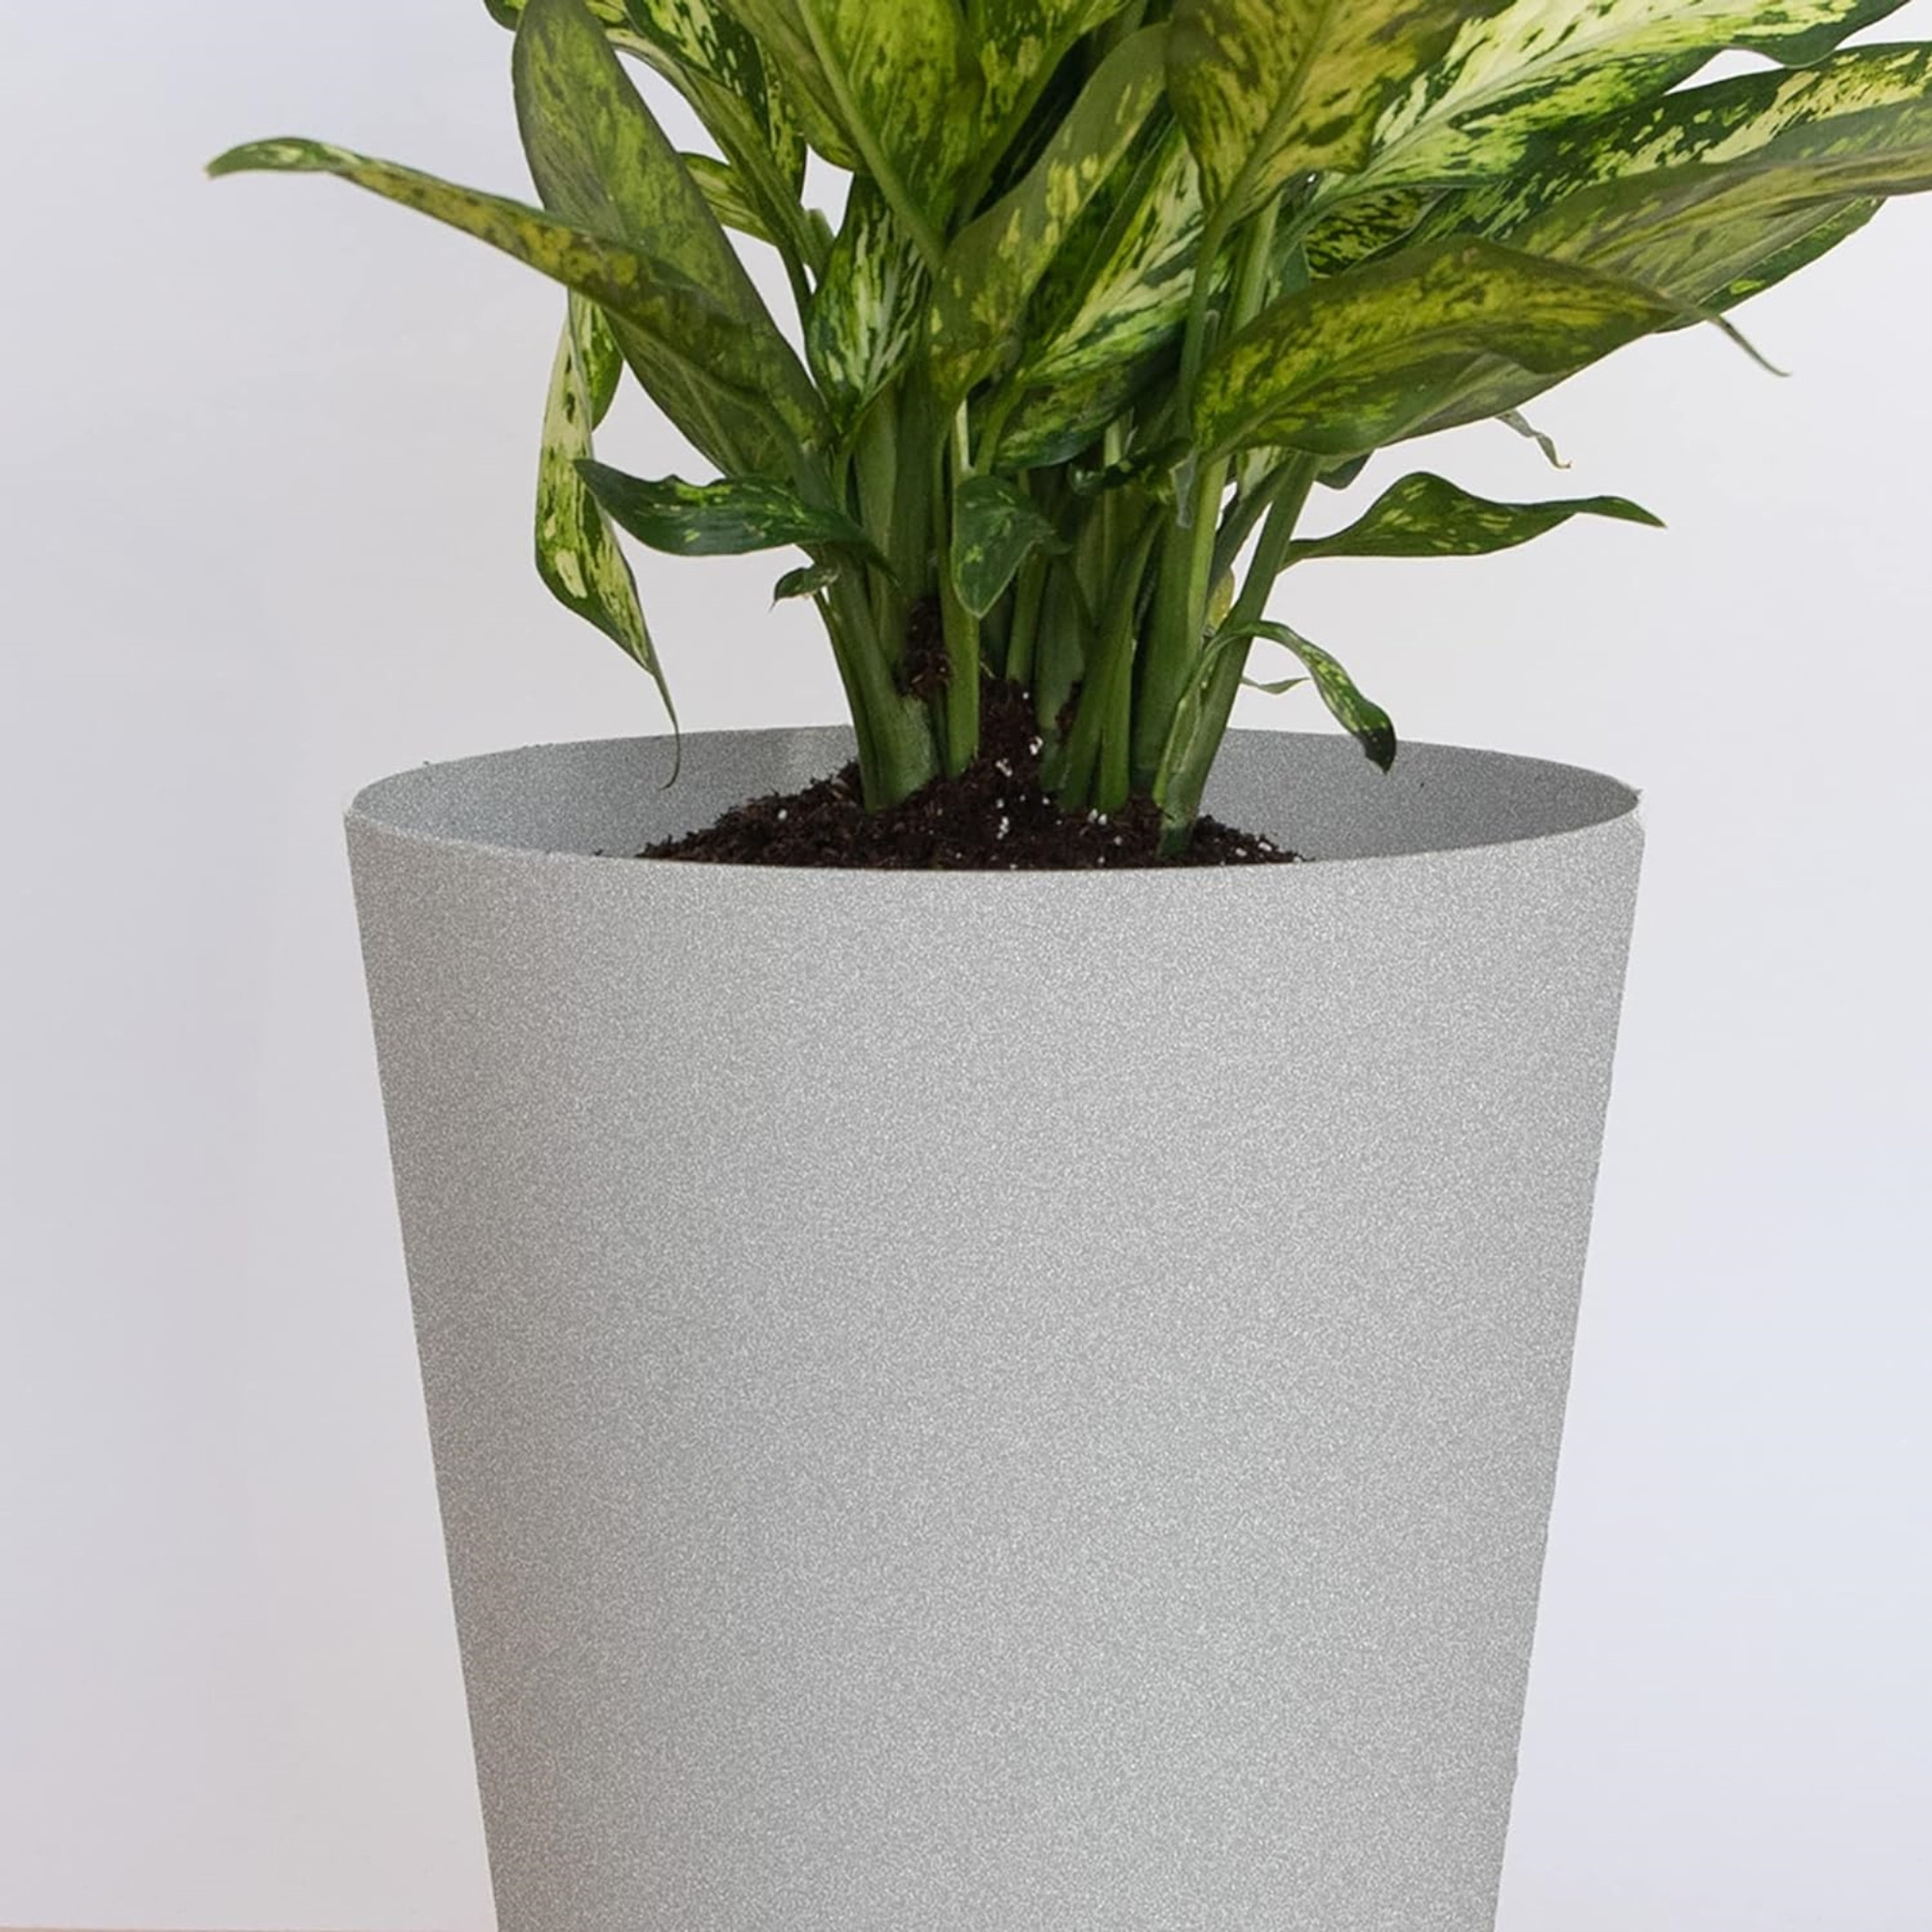 Bloem Indoor/Outdoor Tall Finley Tapered Round, 100% Recycled Plastic Pot, Cement Color, 4 Gallon Soil Capacity, 14